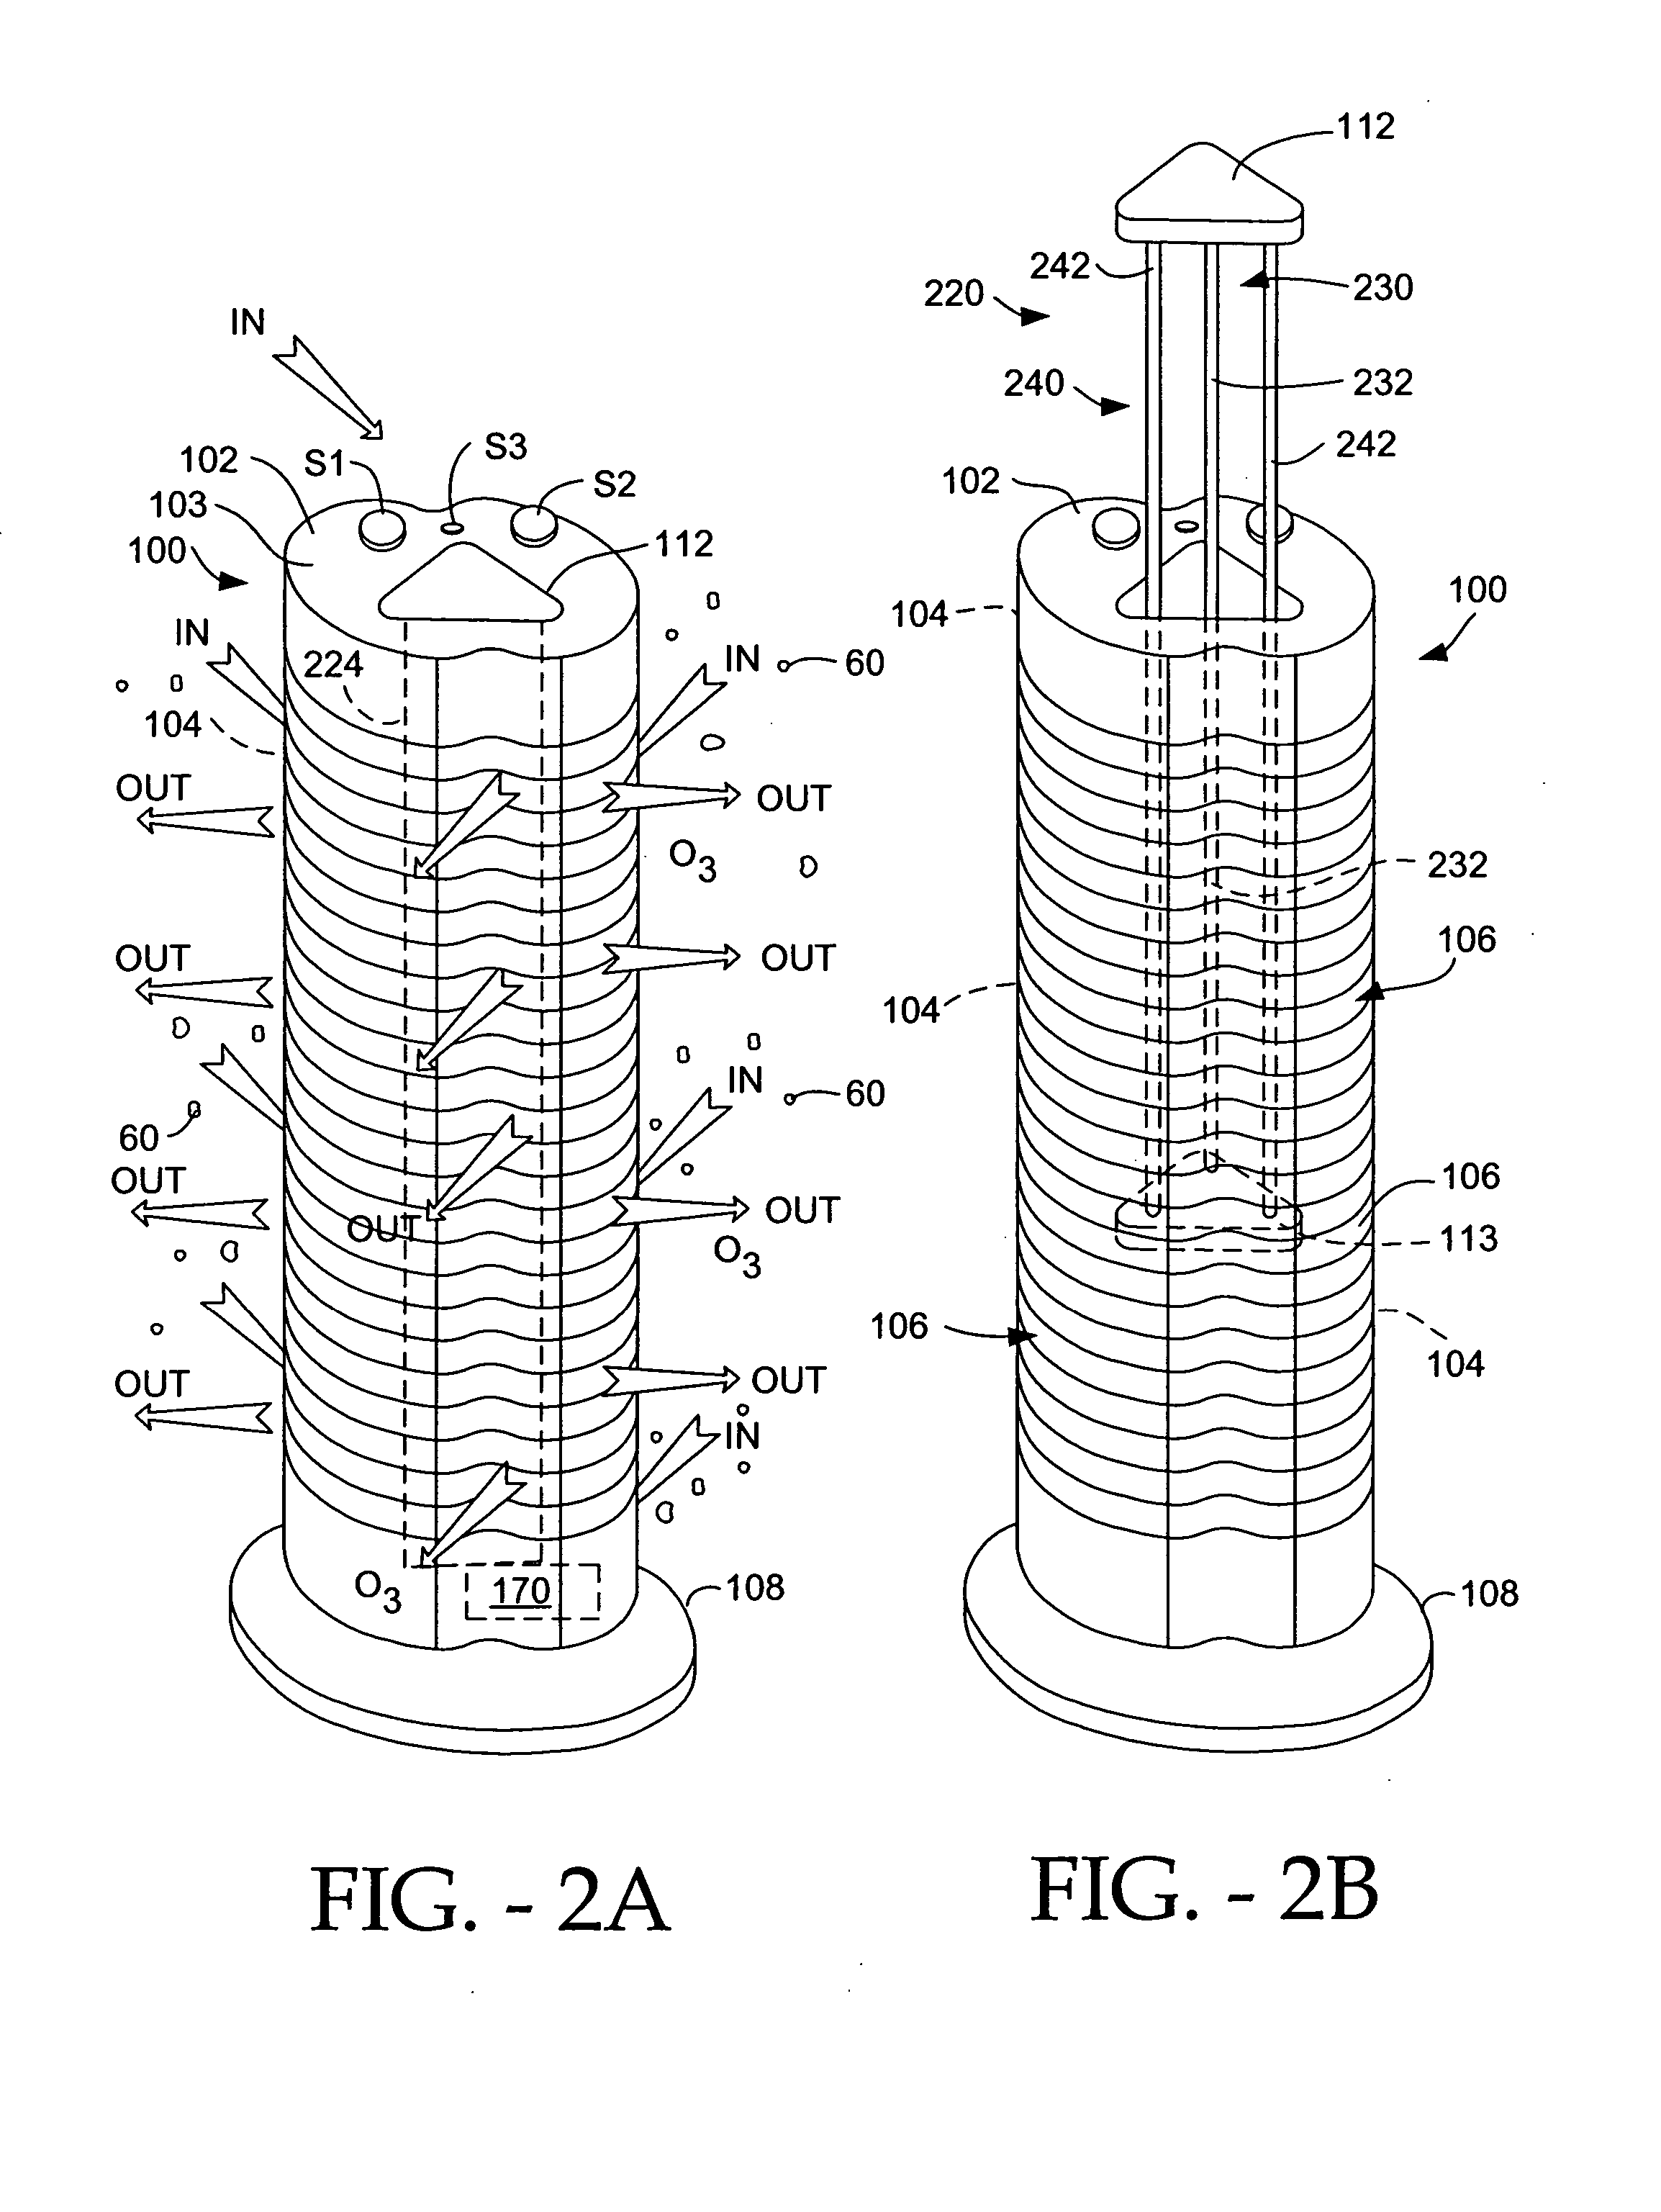 Electro-kinetic air transporter-conditioner devices with electrically conductive foam emitter electrode